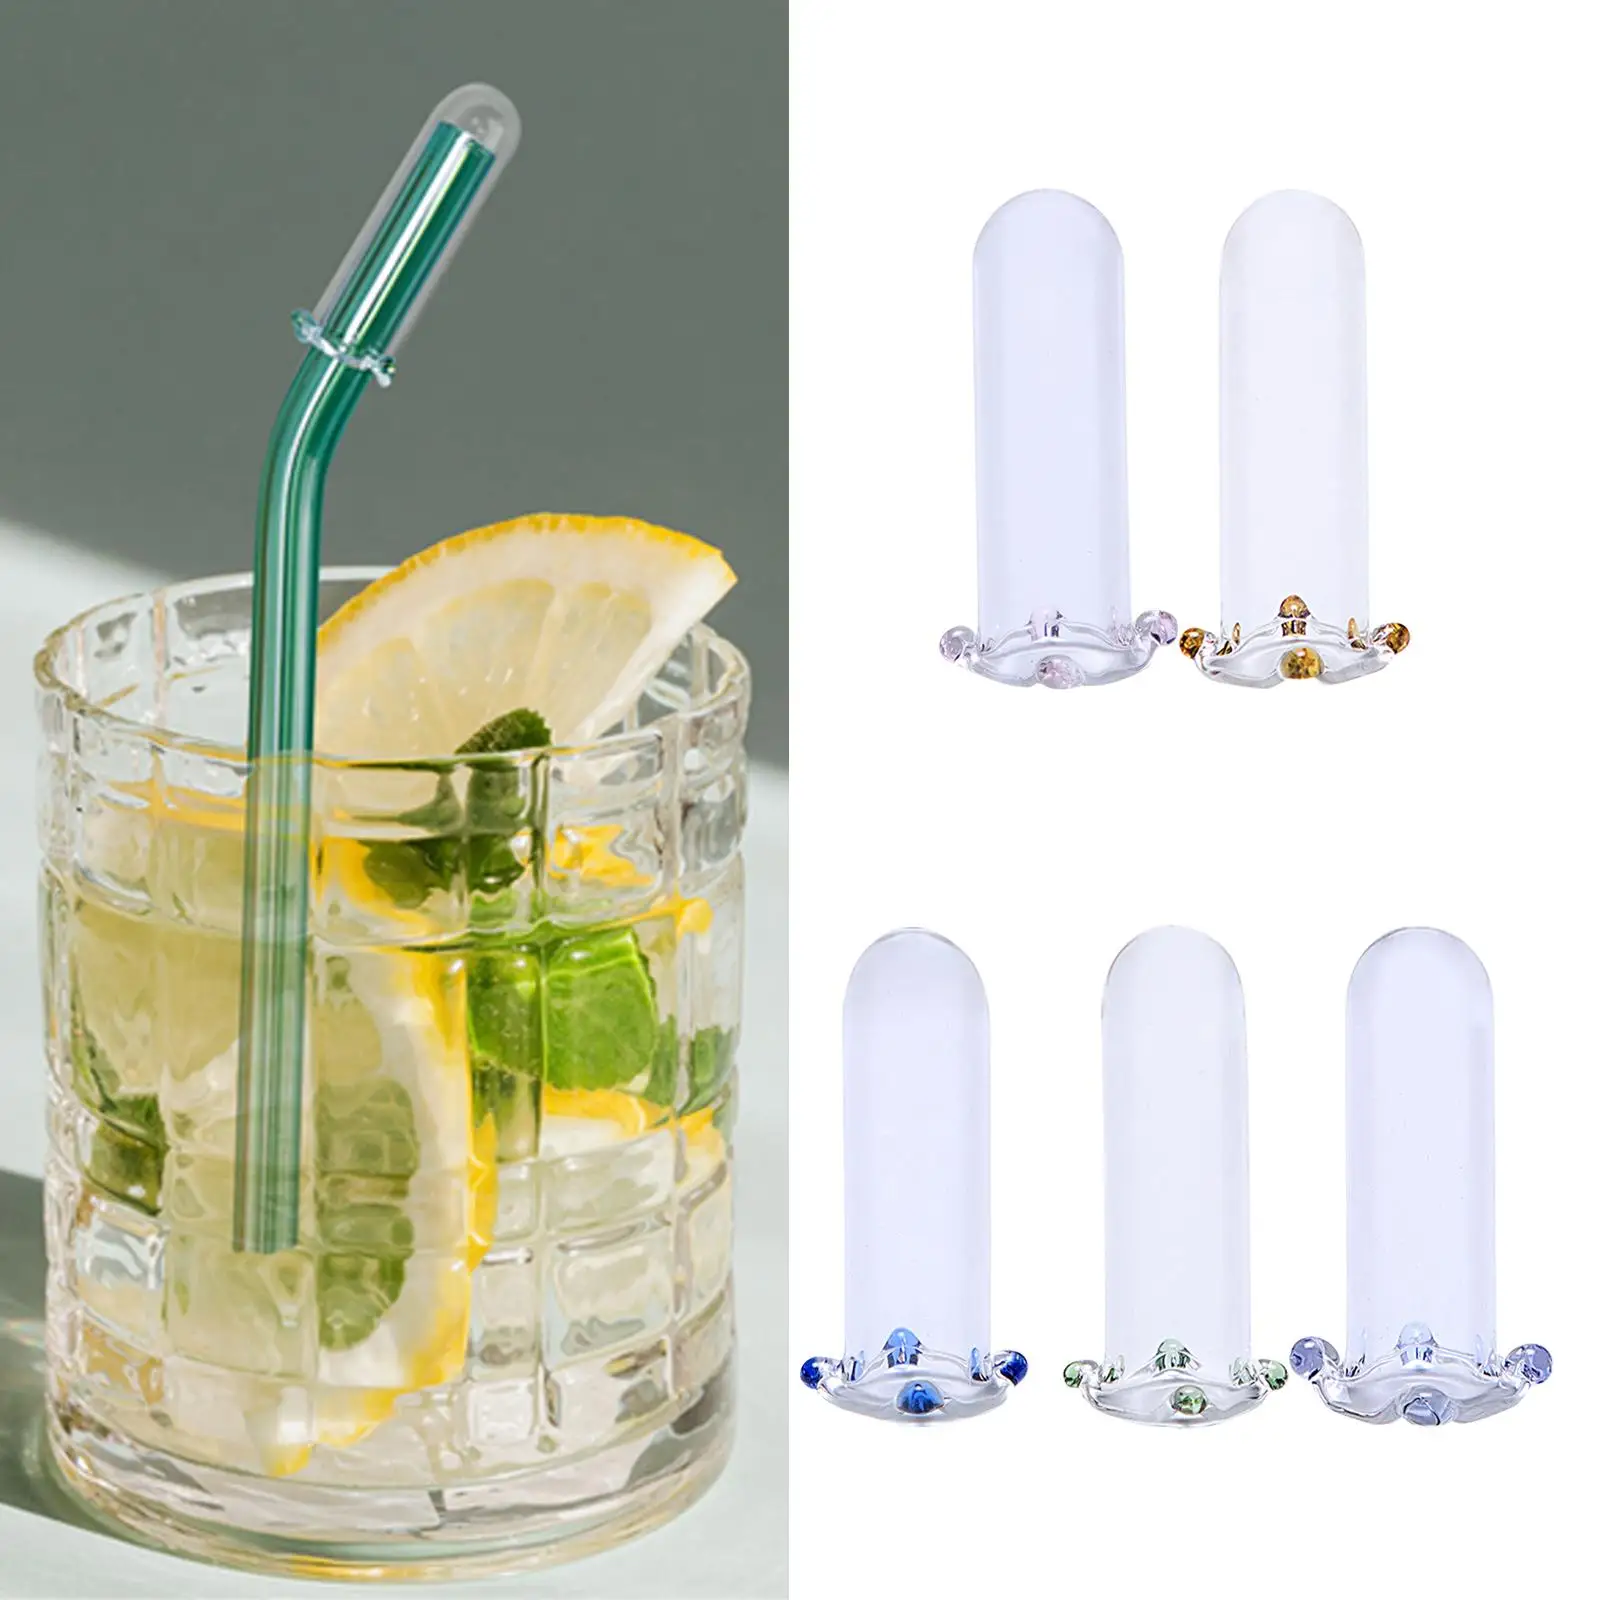 5x Glass Straw Covers Drinking Straw Toppers Clear Straws Protector Tips